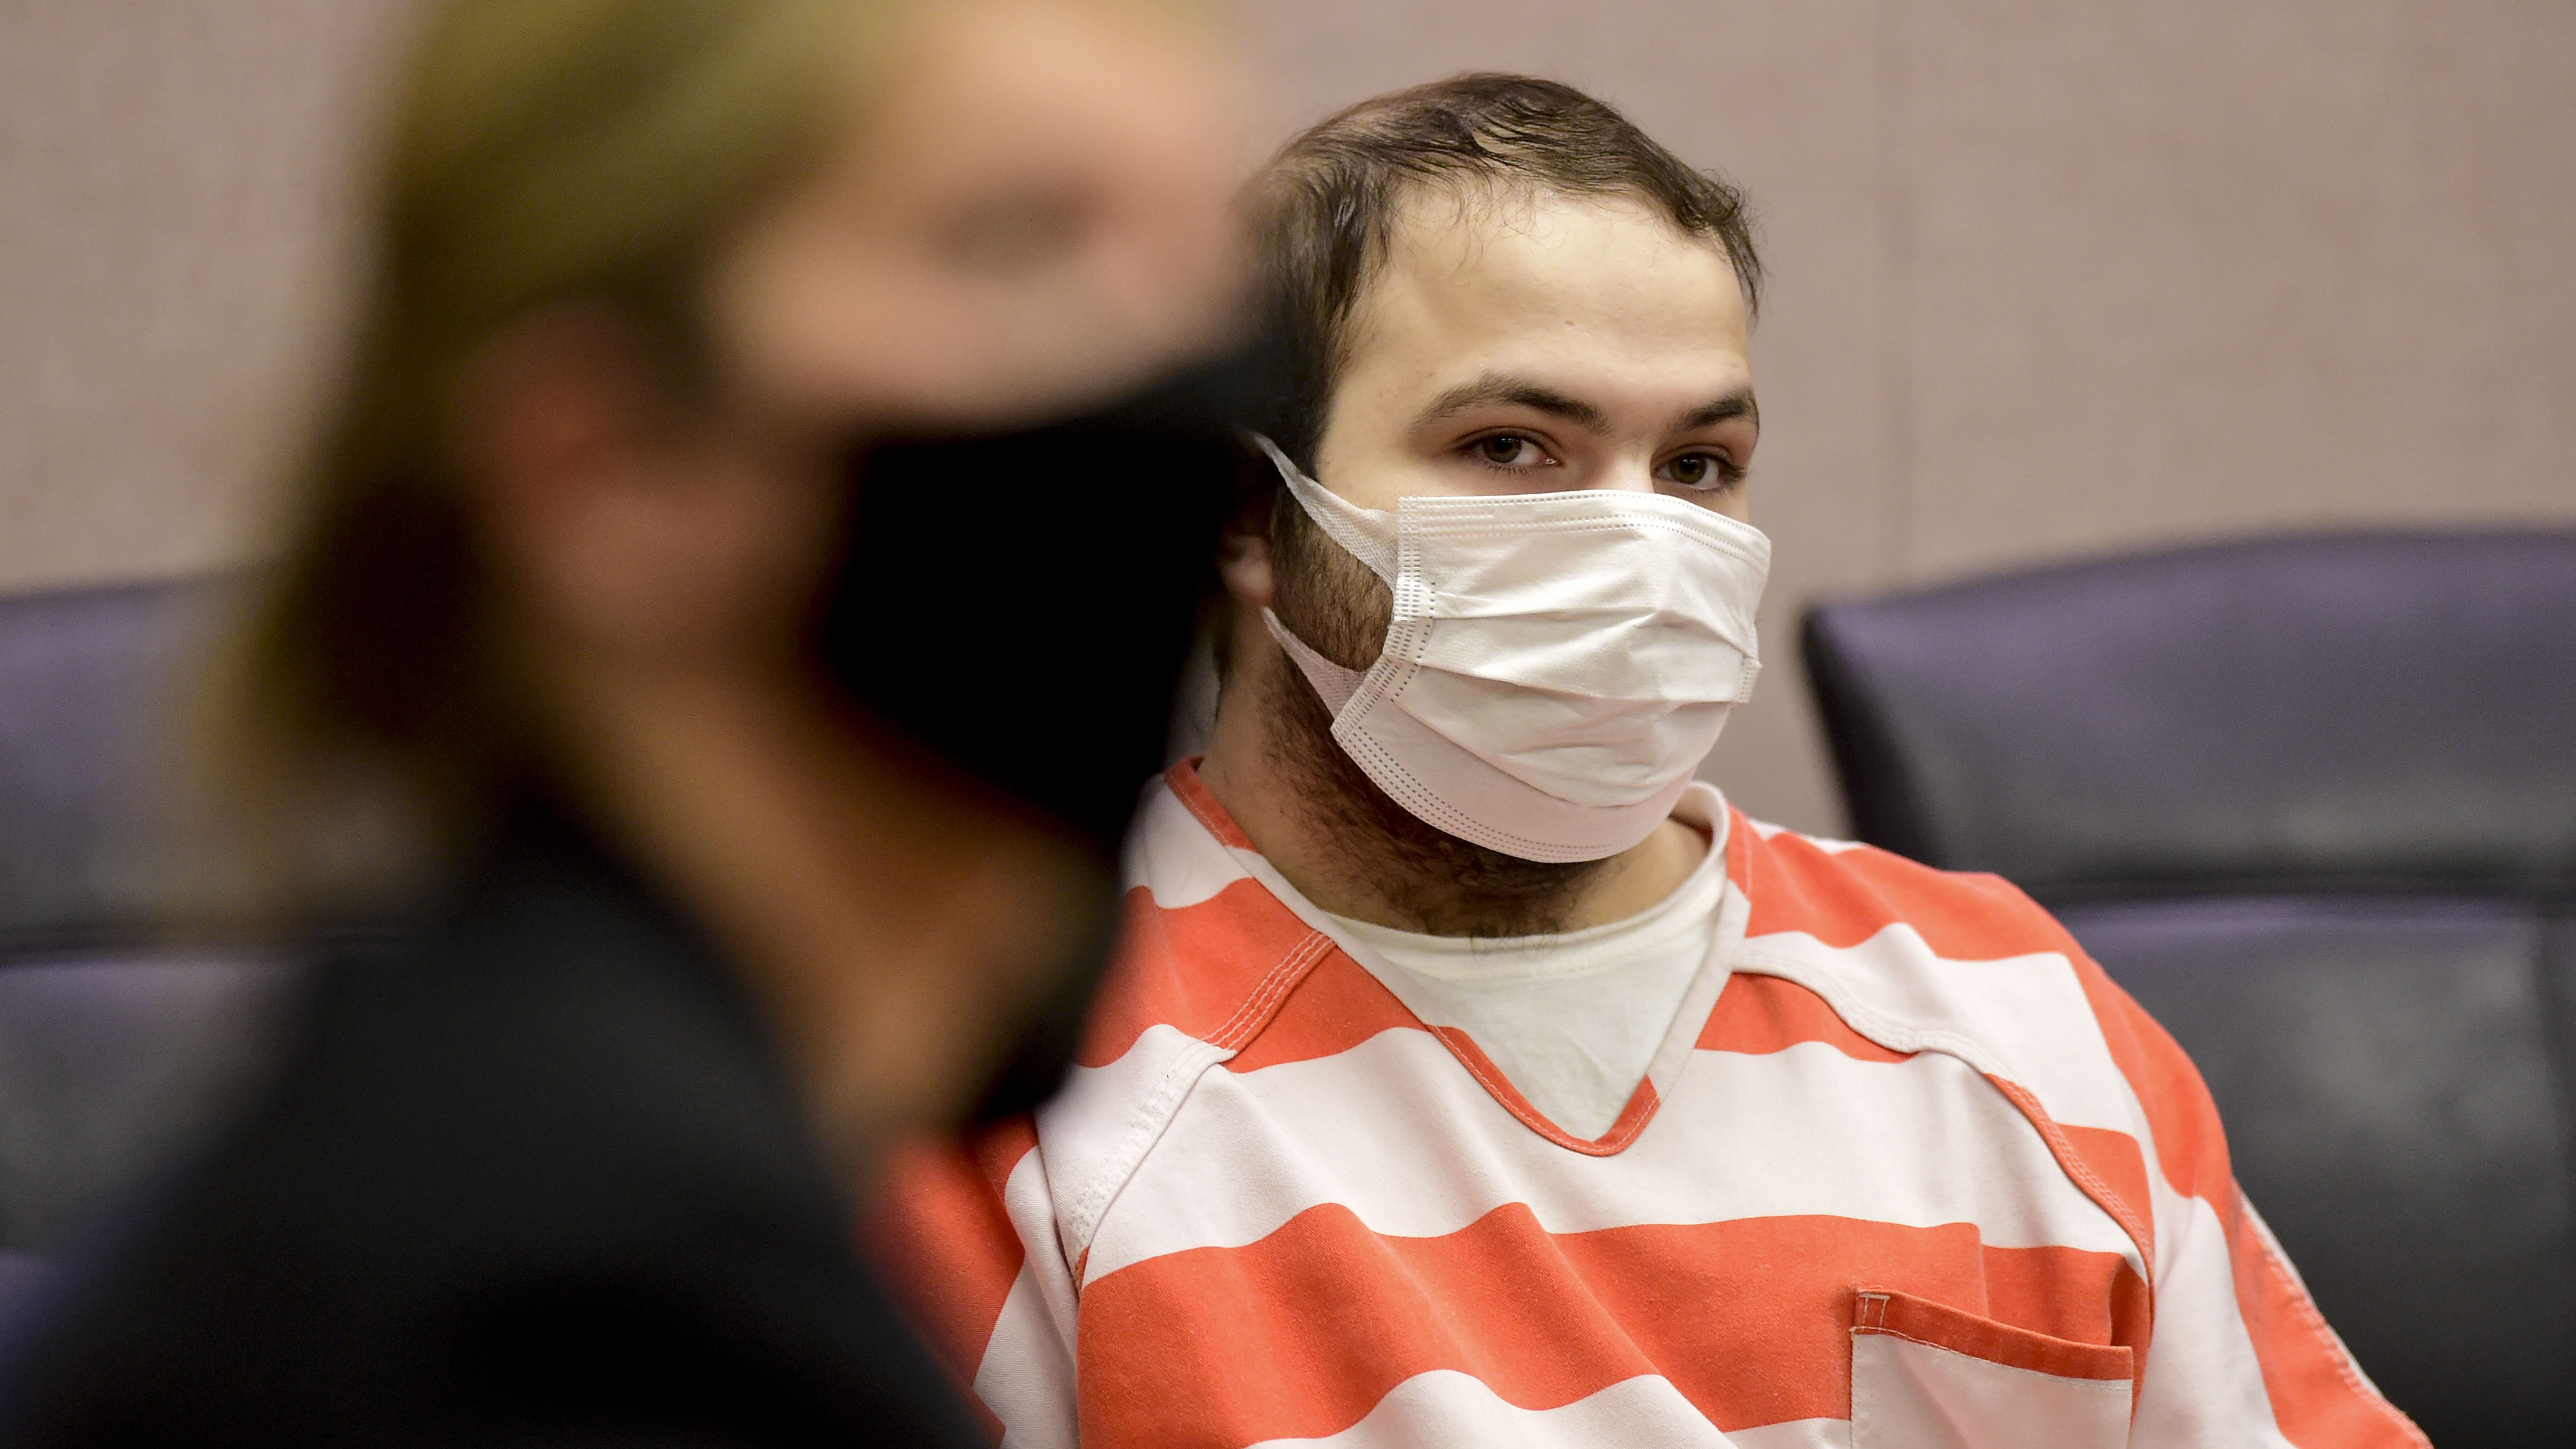 Ahmad Al Aliwi Alissa appears in a Boulder County District courtroom on May 25, 2021.